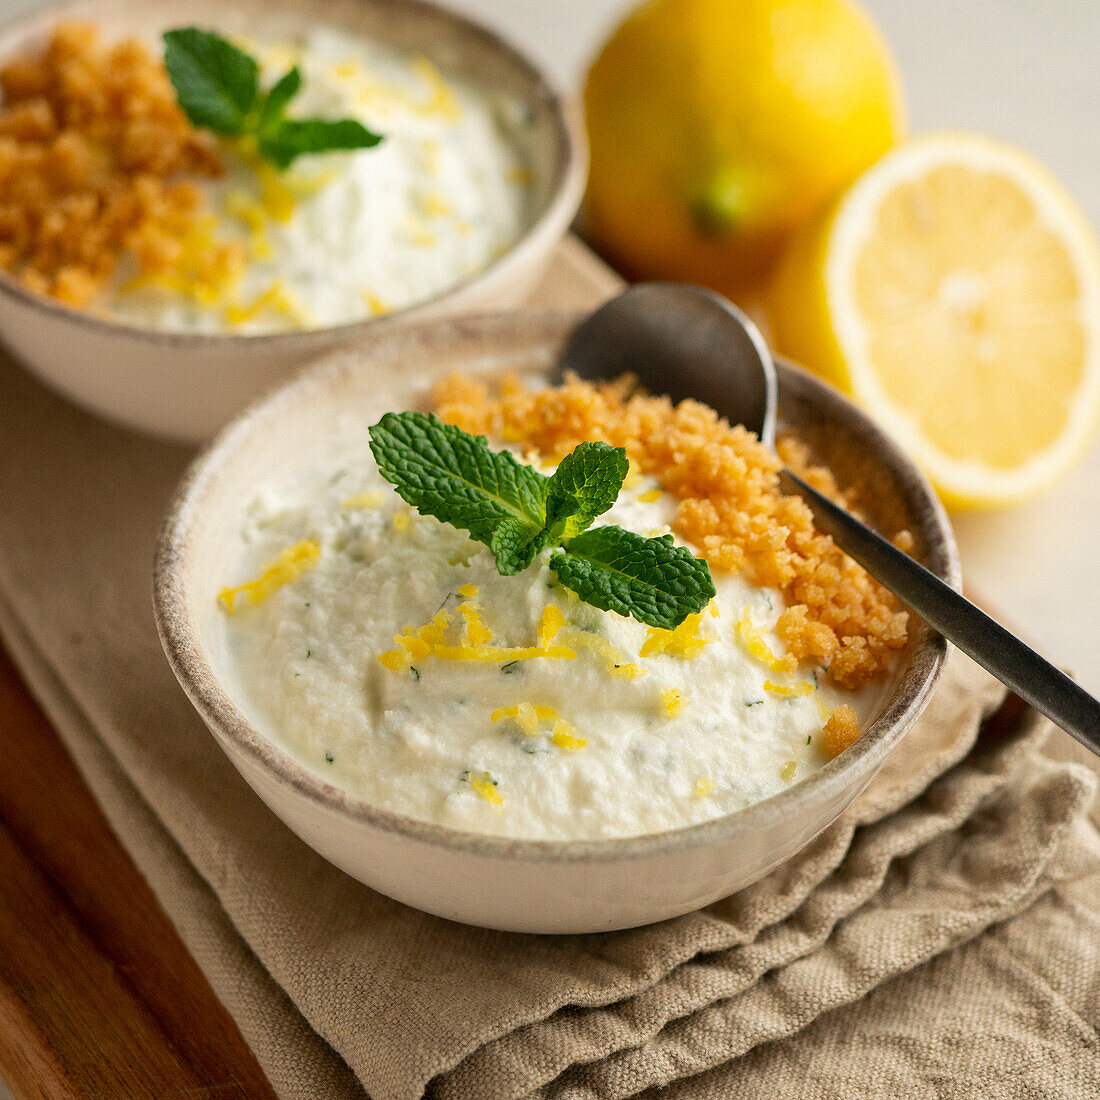 Lemon mousse with biscuit crumbs and mint